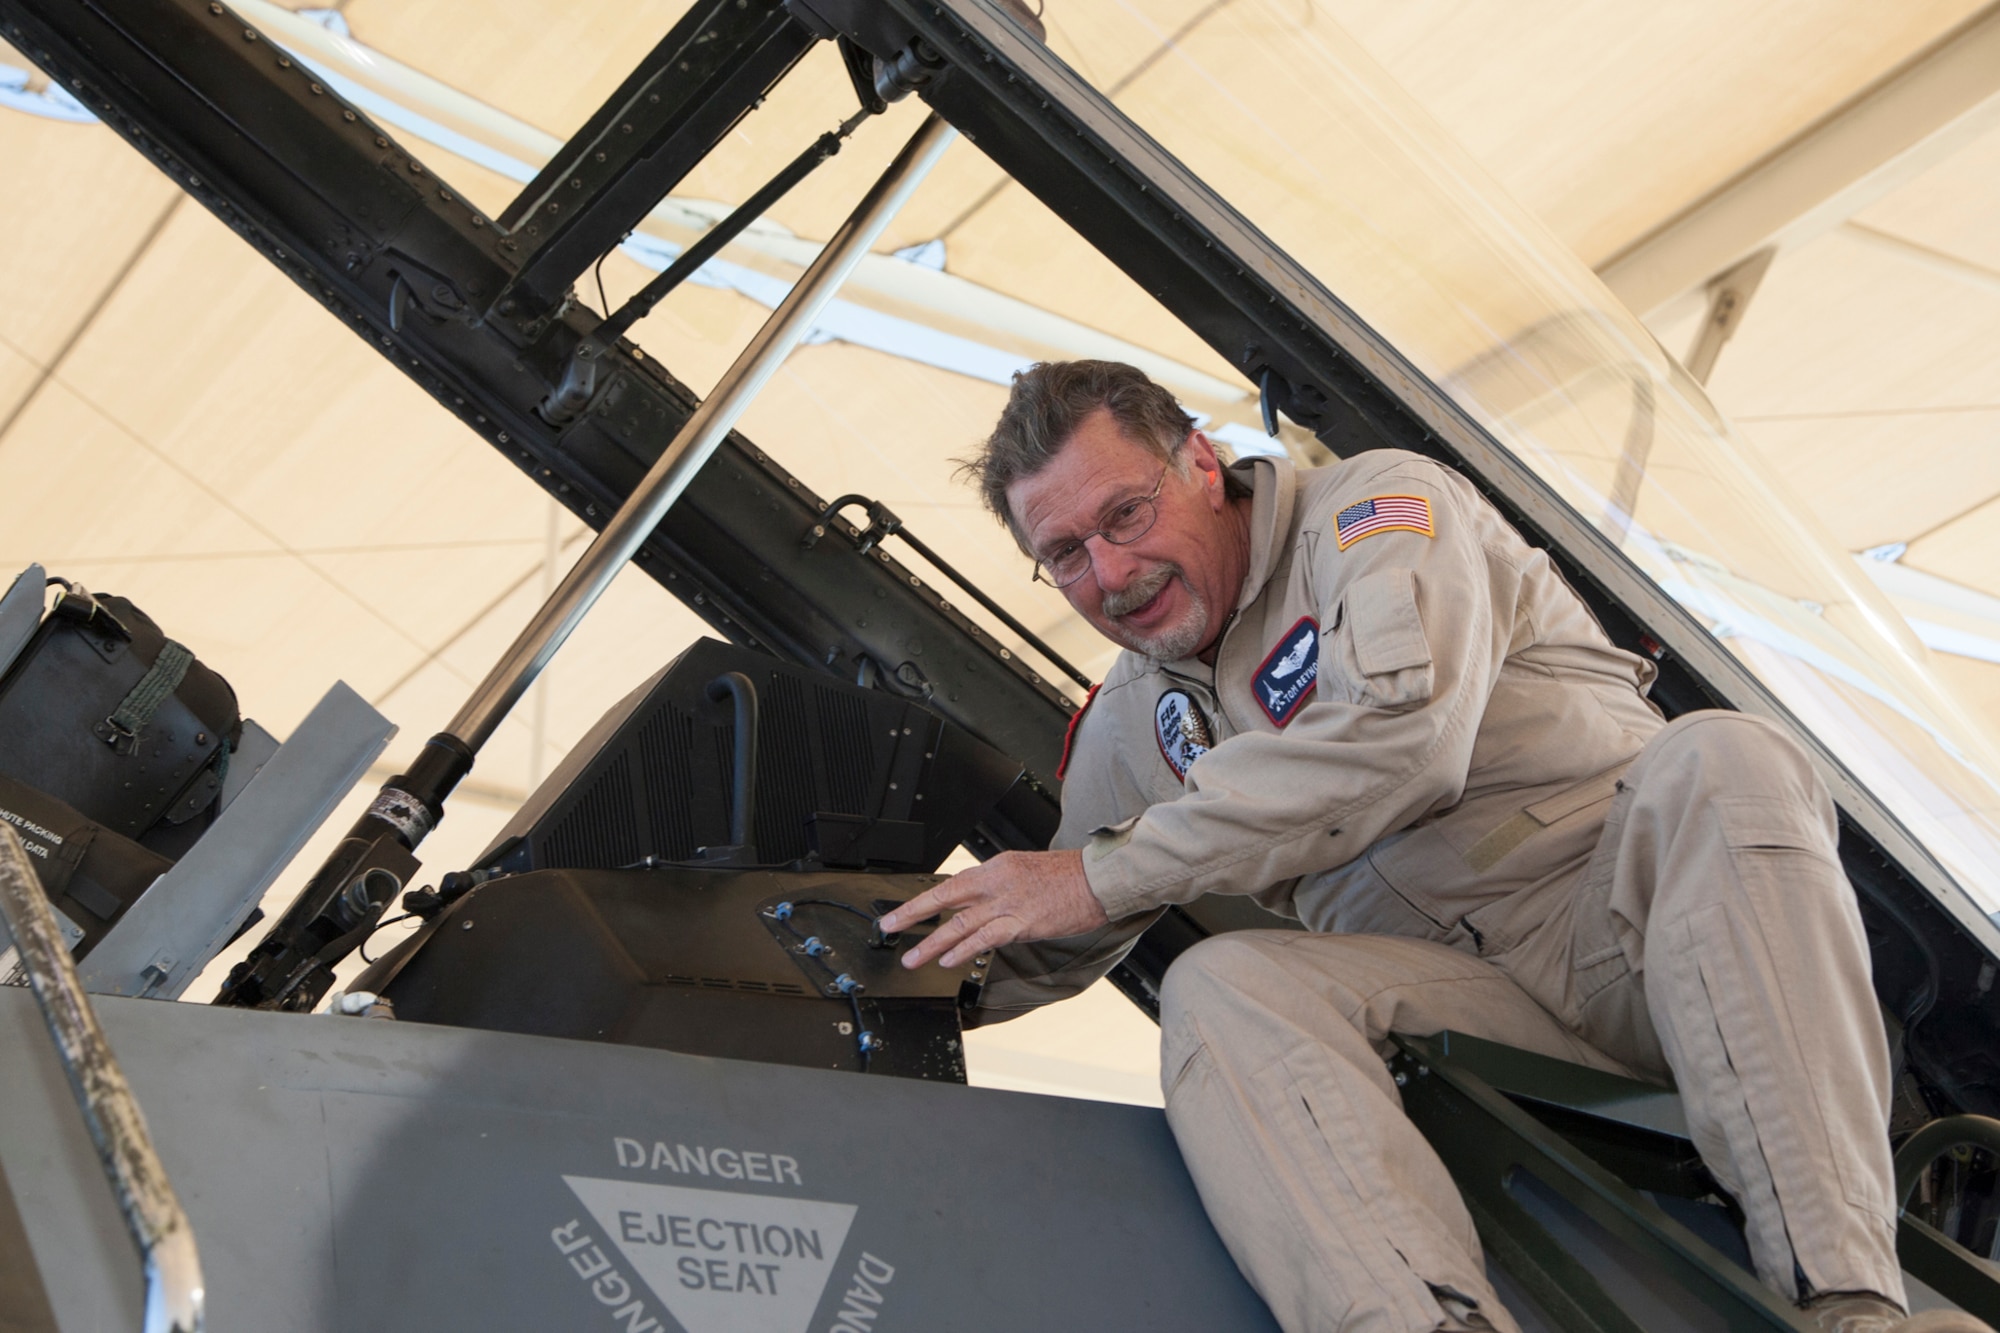 Tom Reynolds, Lockheed Martin aerial photographer, leaves the cockpit for the last time as he completes his final ejection seat flight Sept. 29 after 28 years of immortalizing pilots and aircraft through photos and video. He has been an aerial photographer since 1988 where he supported the continued development of the F-16 Fighting Falcon at the F-16 Combined Test Force. From there his career grew into documenting other airframes – the F-22 Raptor and now the F-35 Lighting II. Reynolds has 1,800 flight hours in the F-16 and a “couple of hundred” more in the F-15 Eagle. The majority have been as photo chase for testing at Edwards. Before working for Lockheed Martin, he worked for General Dynamics – then the manufacturer of the F-16 – in his hometown of Fort Worth, Texas. He came to Edwards as part of a team tasked to perform initial flight tests of two new delta-winged versions of the F-16 called the F-16XL. Reynolds will continue to work for Lockheed Martin on the ground. (Courtesy photo by Chad Bellay/Lockheed Martin)